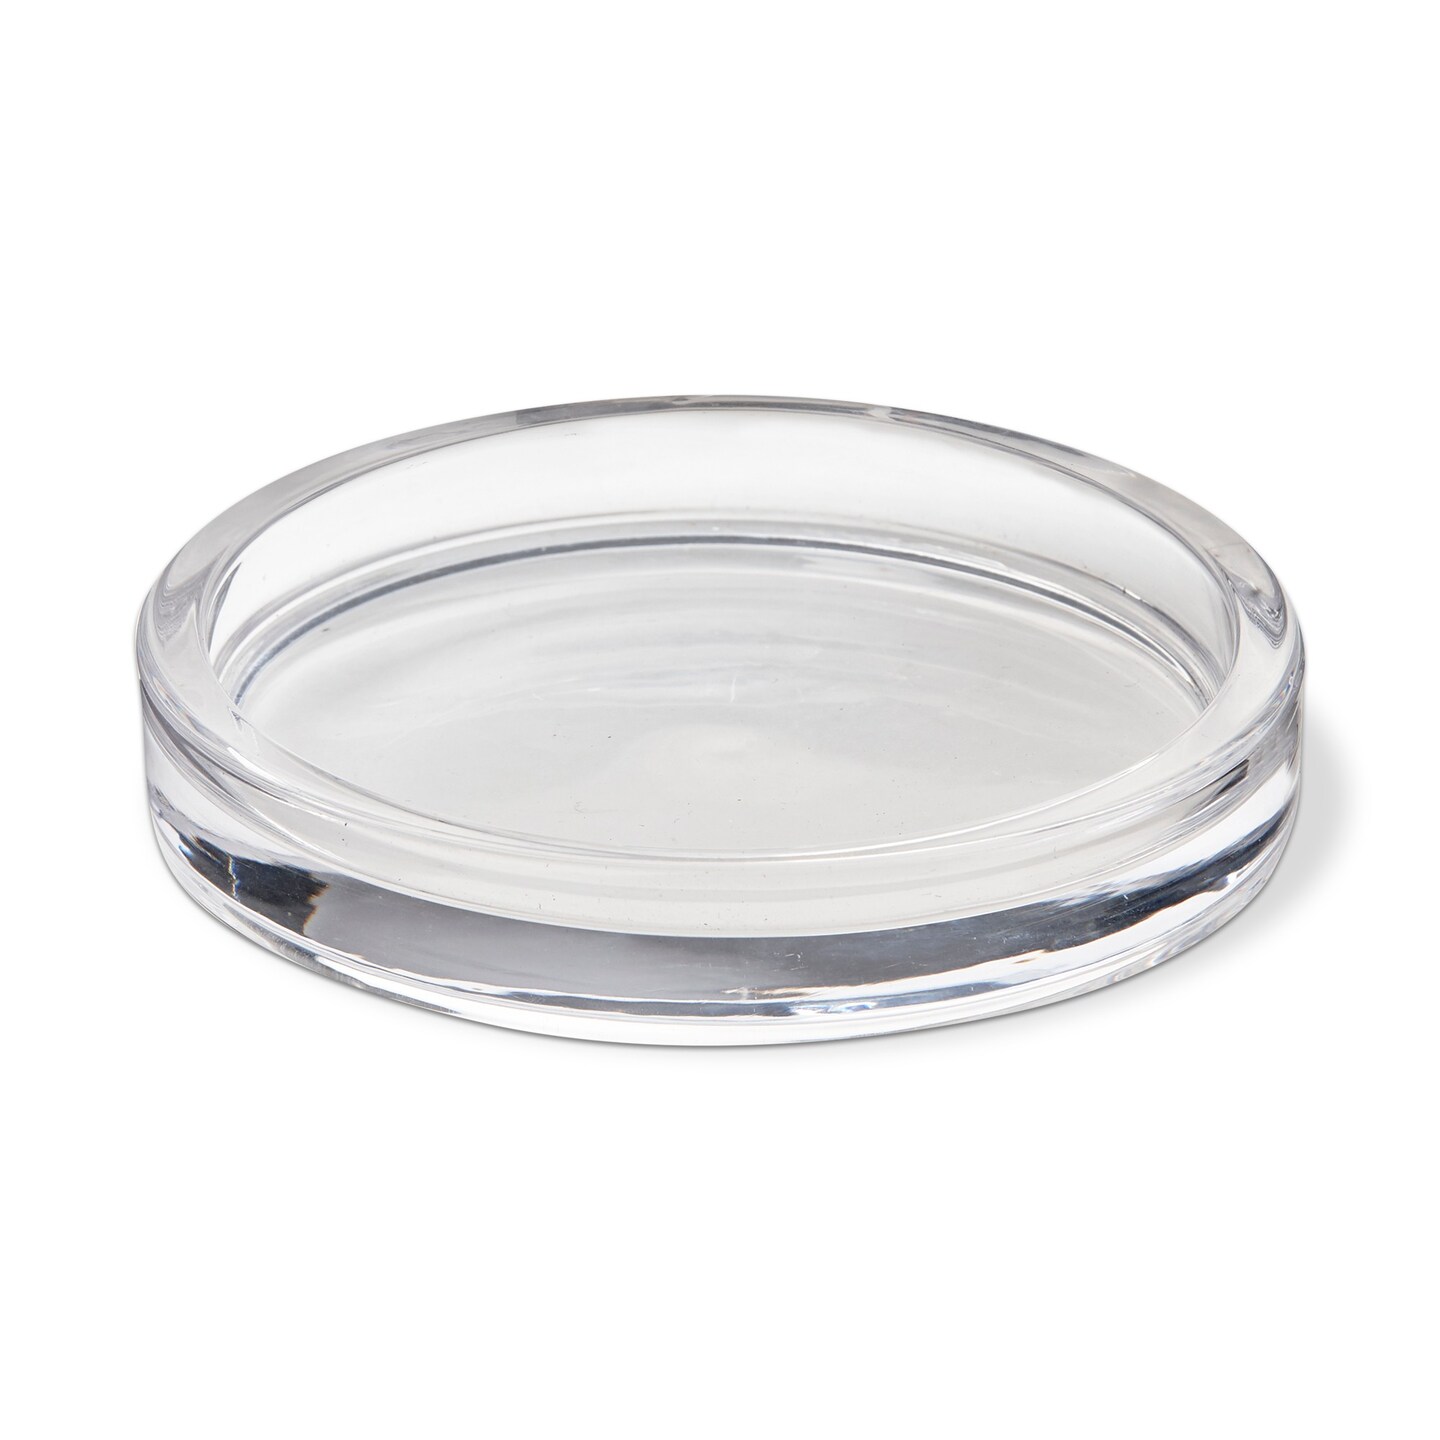 Radiance Clear Glass Pillar Plate Large, 4.7L x 4.7W x .80H inches